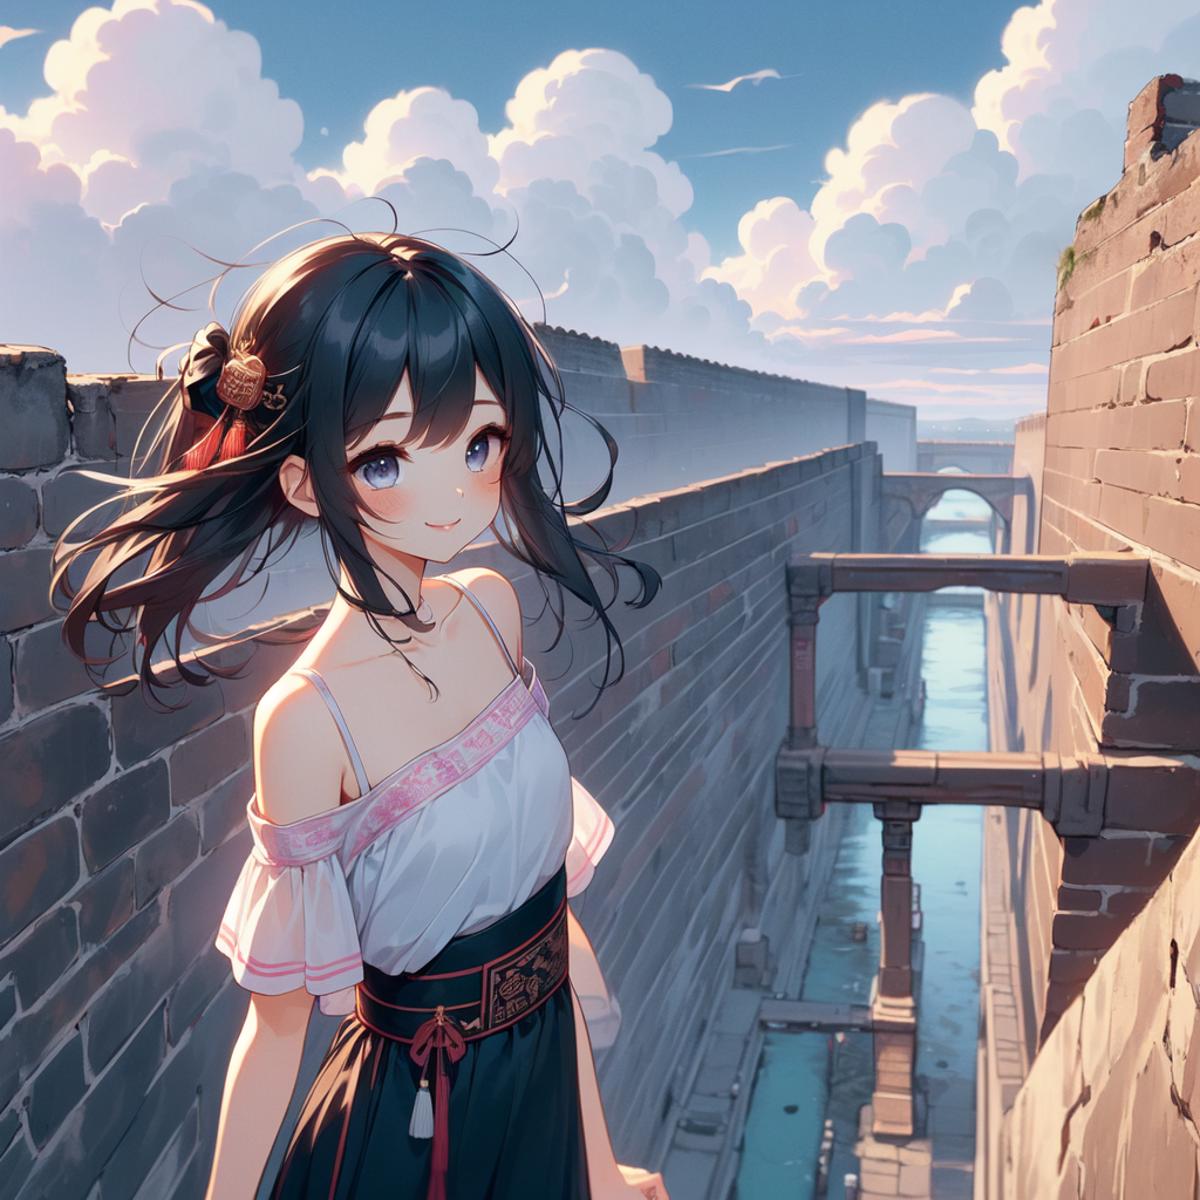 girl like city wall image by ghostpaint